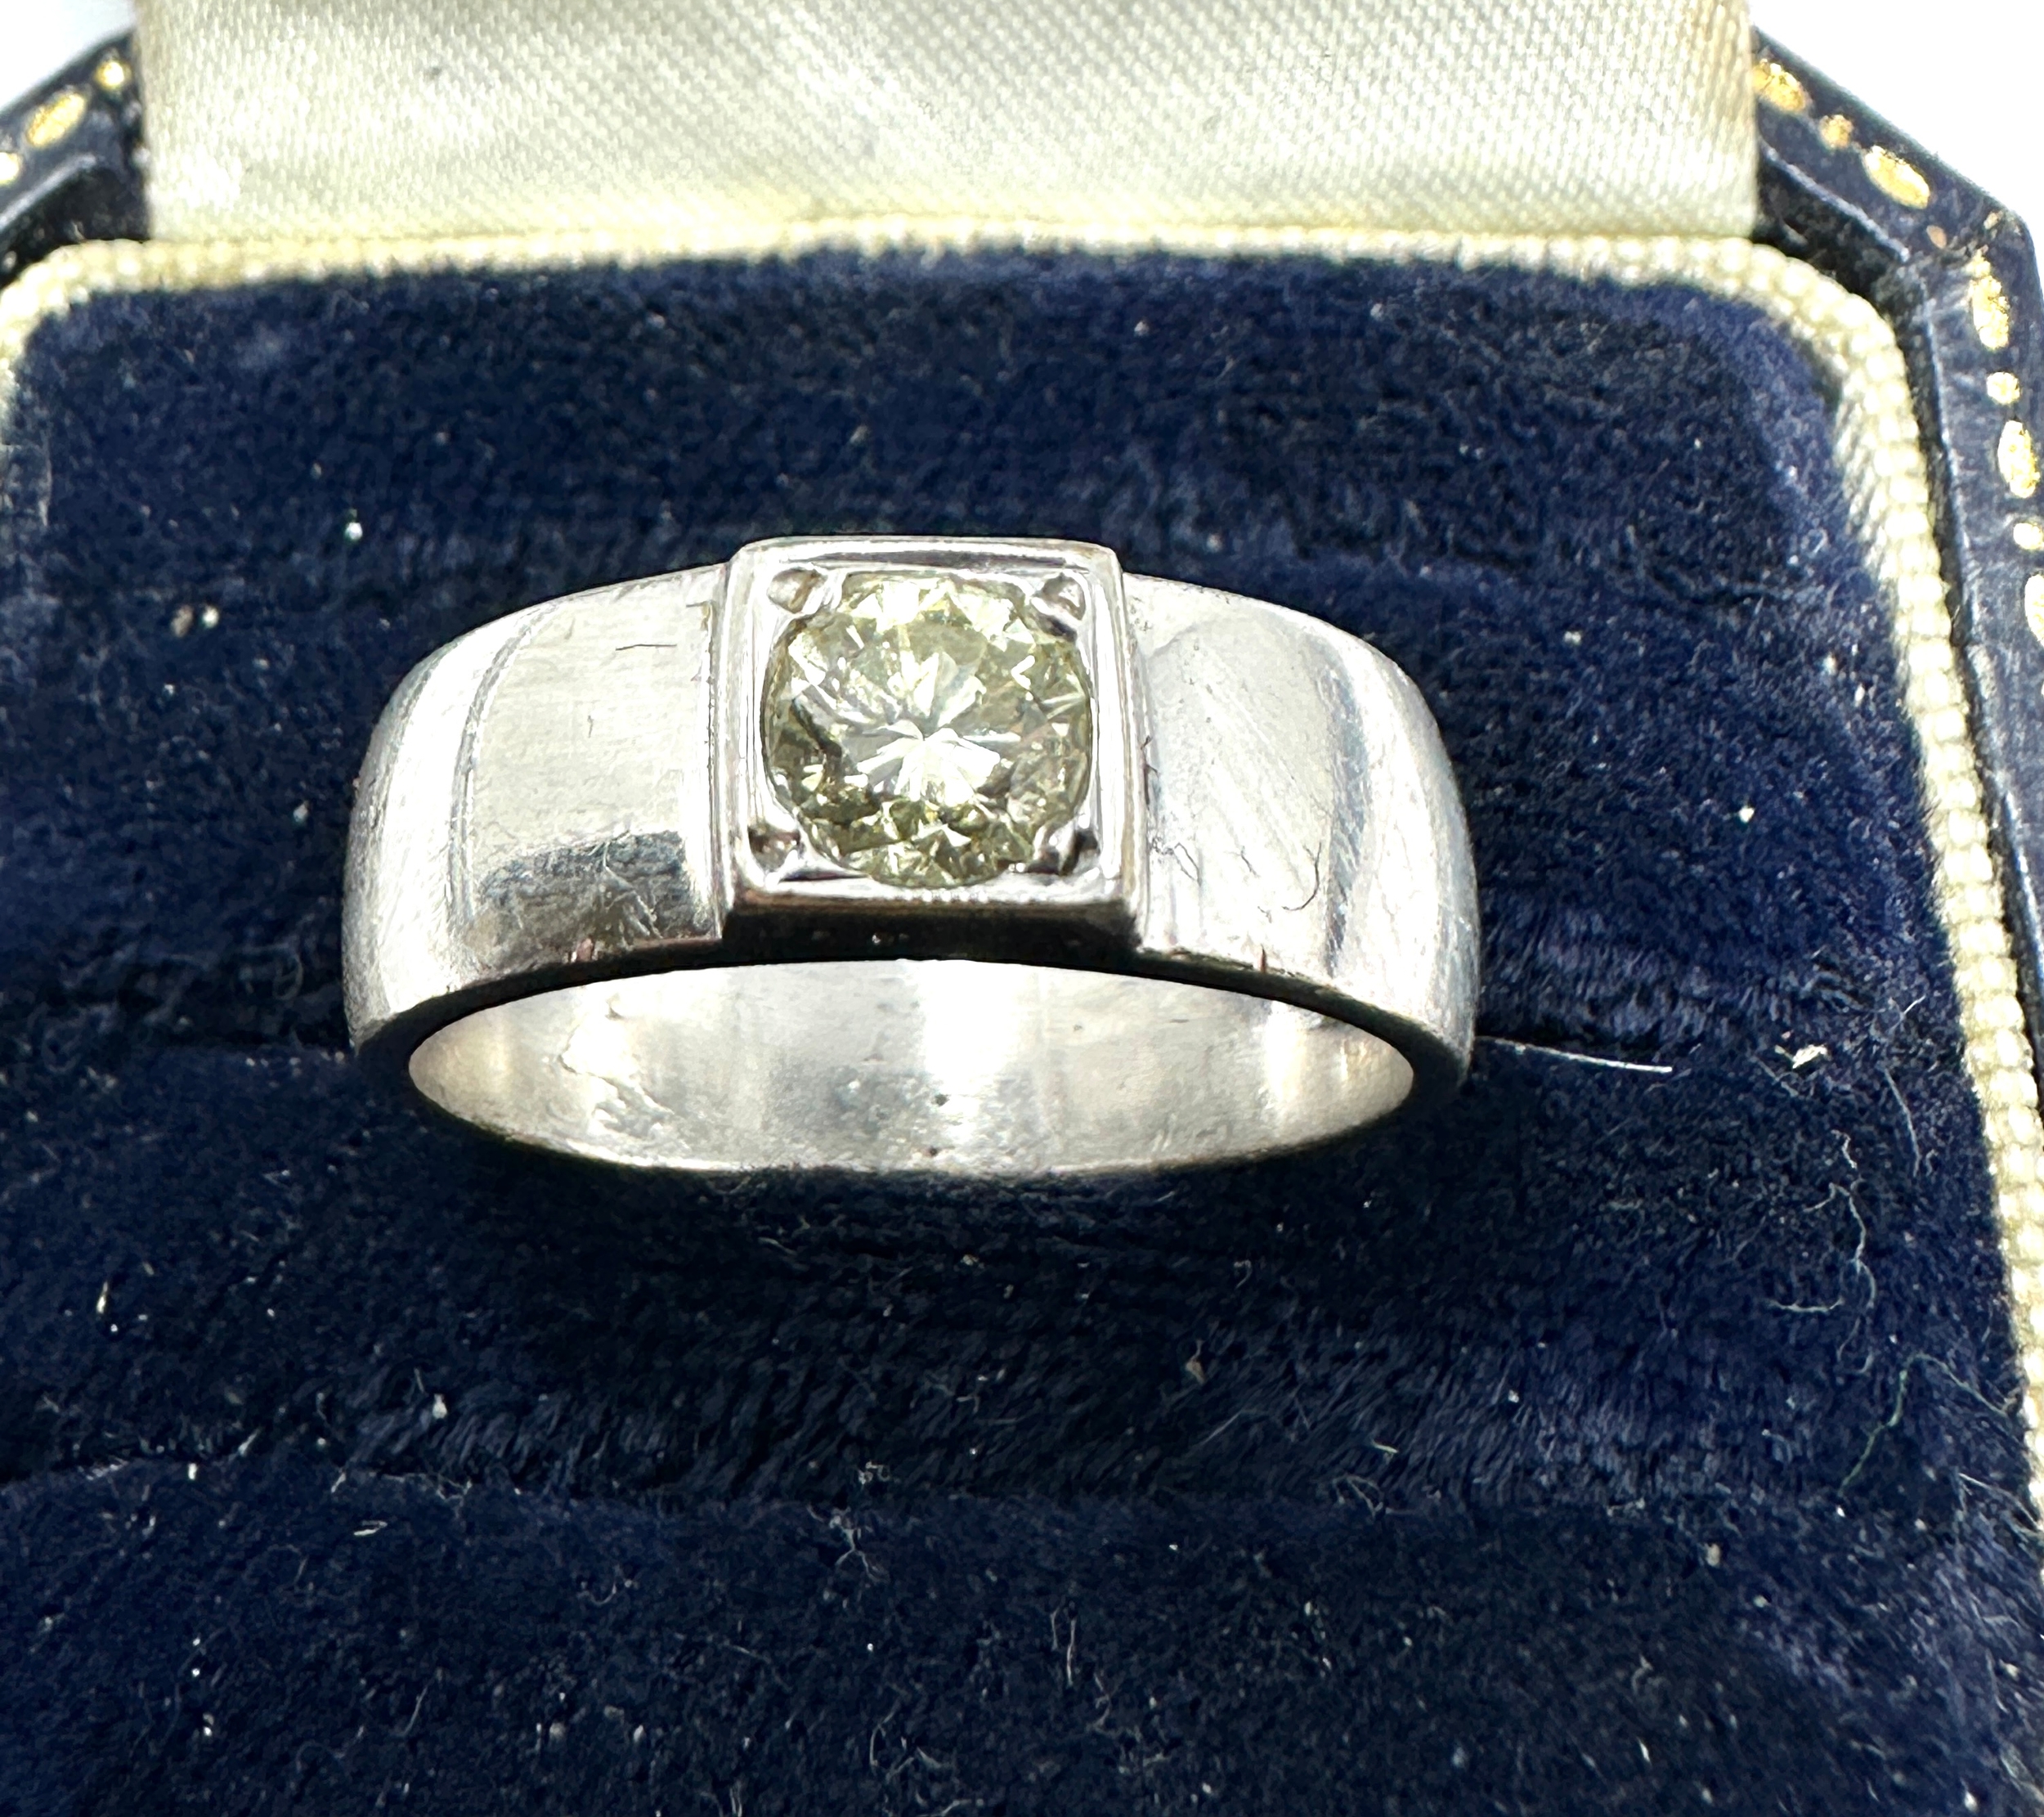 18ct gold diamond band ring diamond measures approx 5.25mm est 50-60 pt diamond weight of ring 8.5g